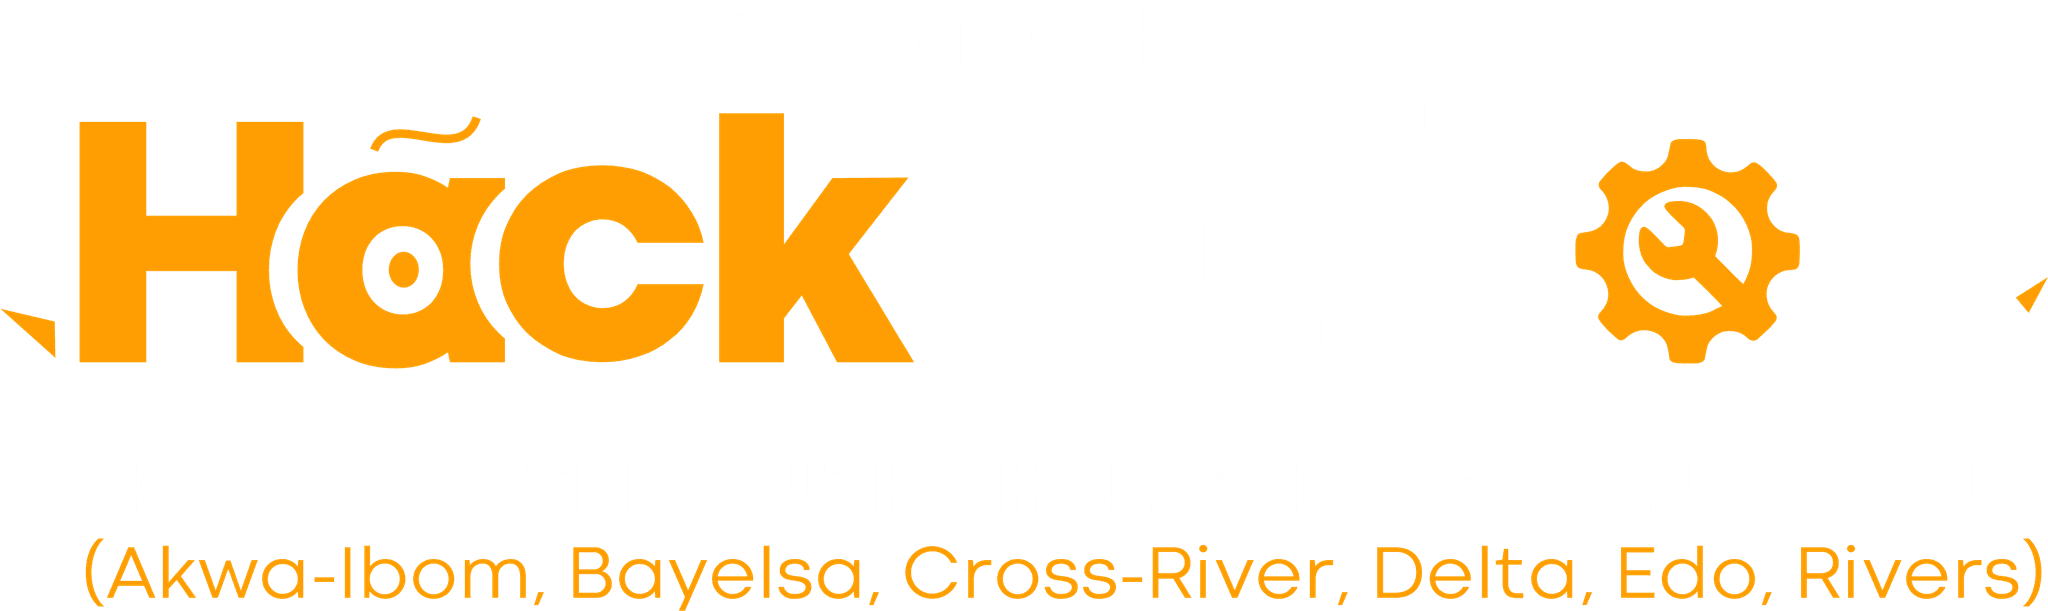 amihub hackathon 2023 for south-south tetiary institutions